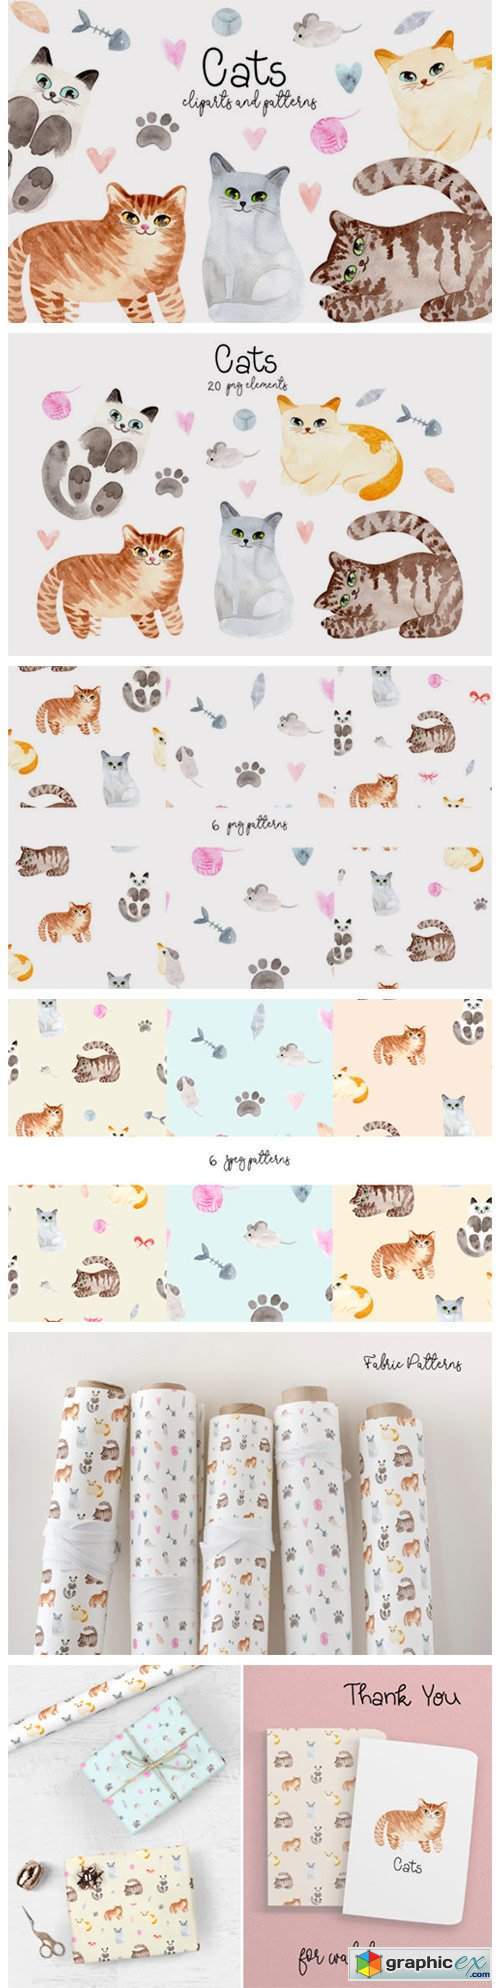 Watercolor Cute Cats. Patterns, Cliparts